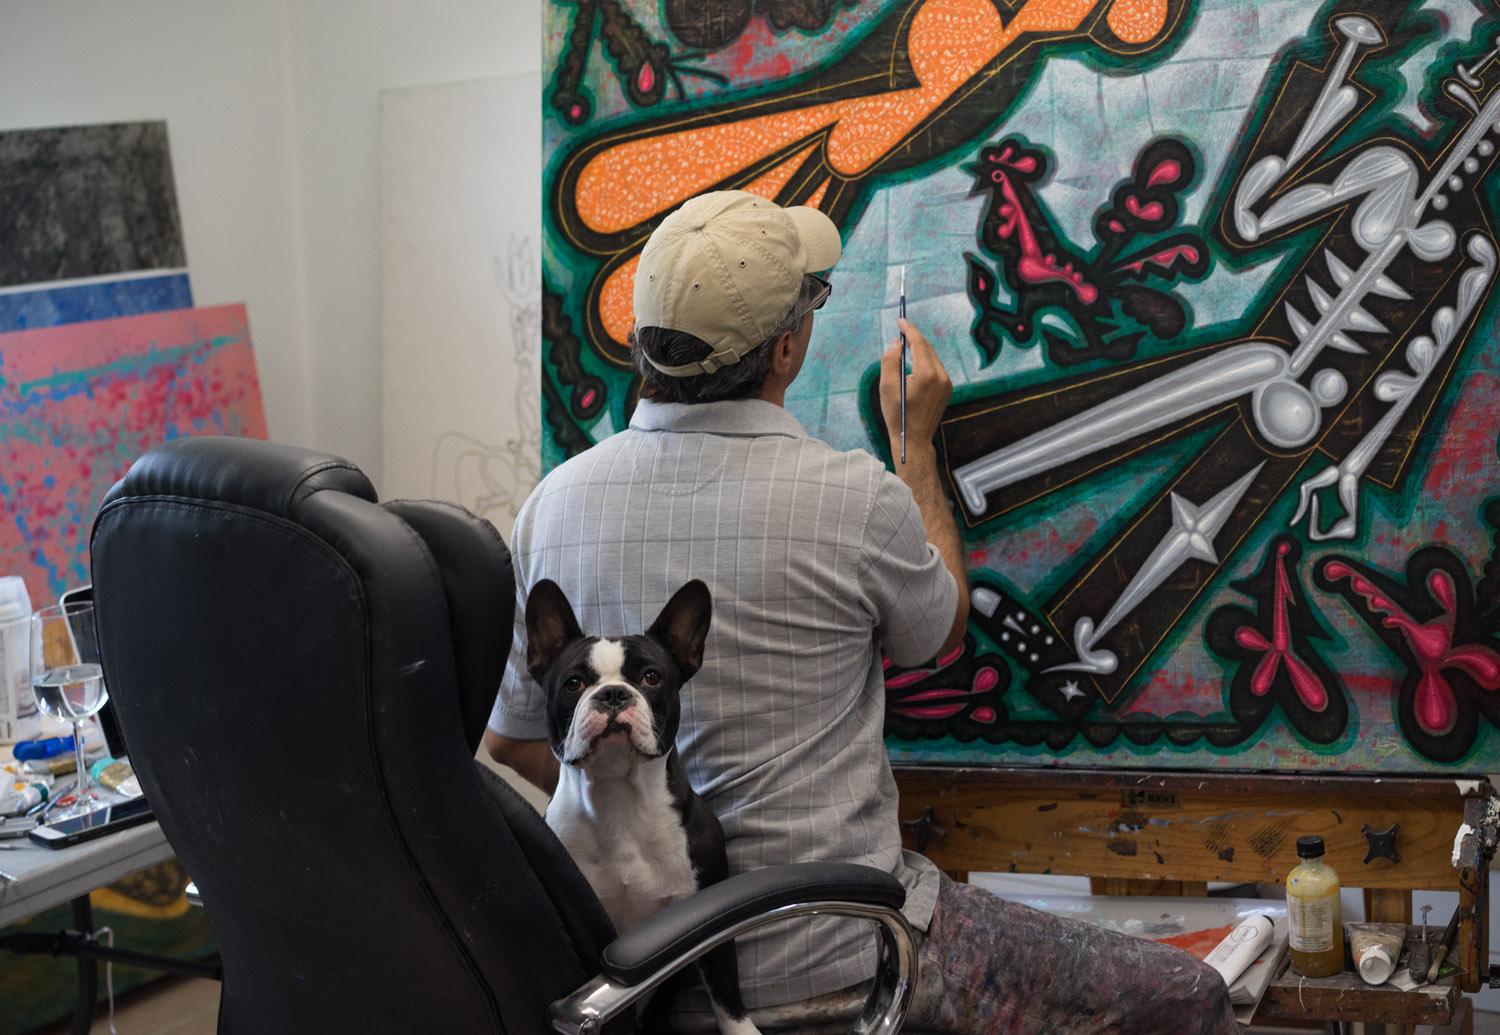 Carlos Luna working with his dog Cocoa, 2018